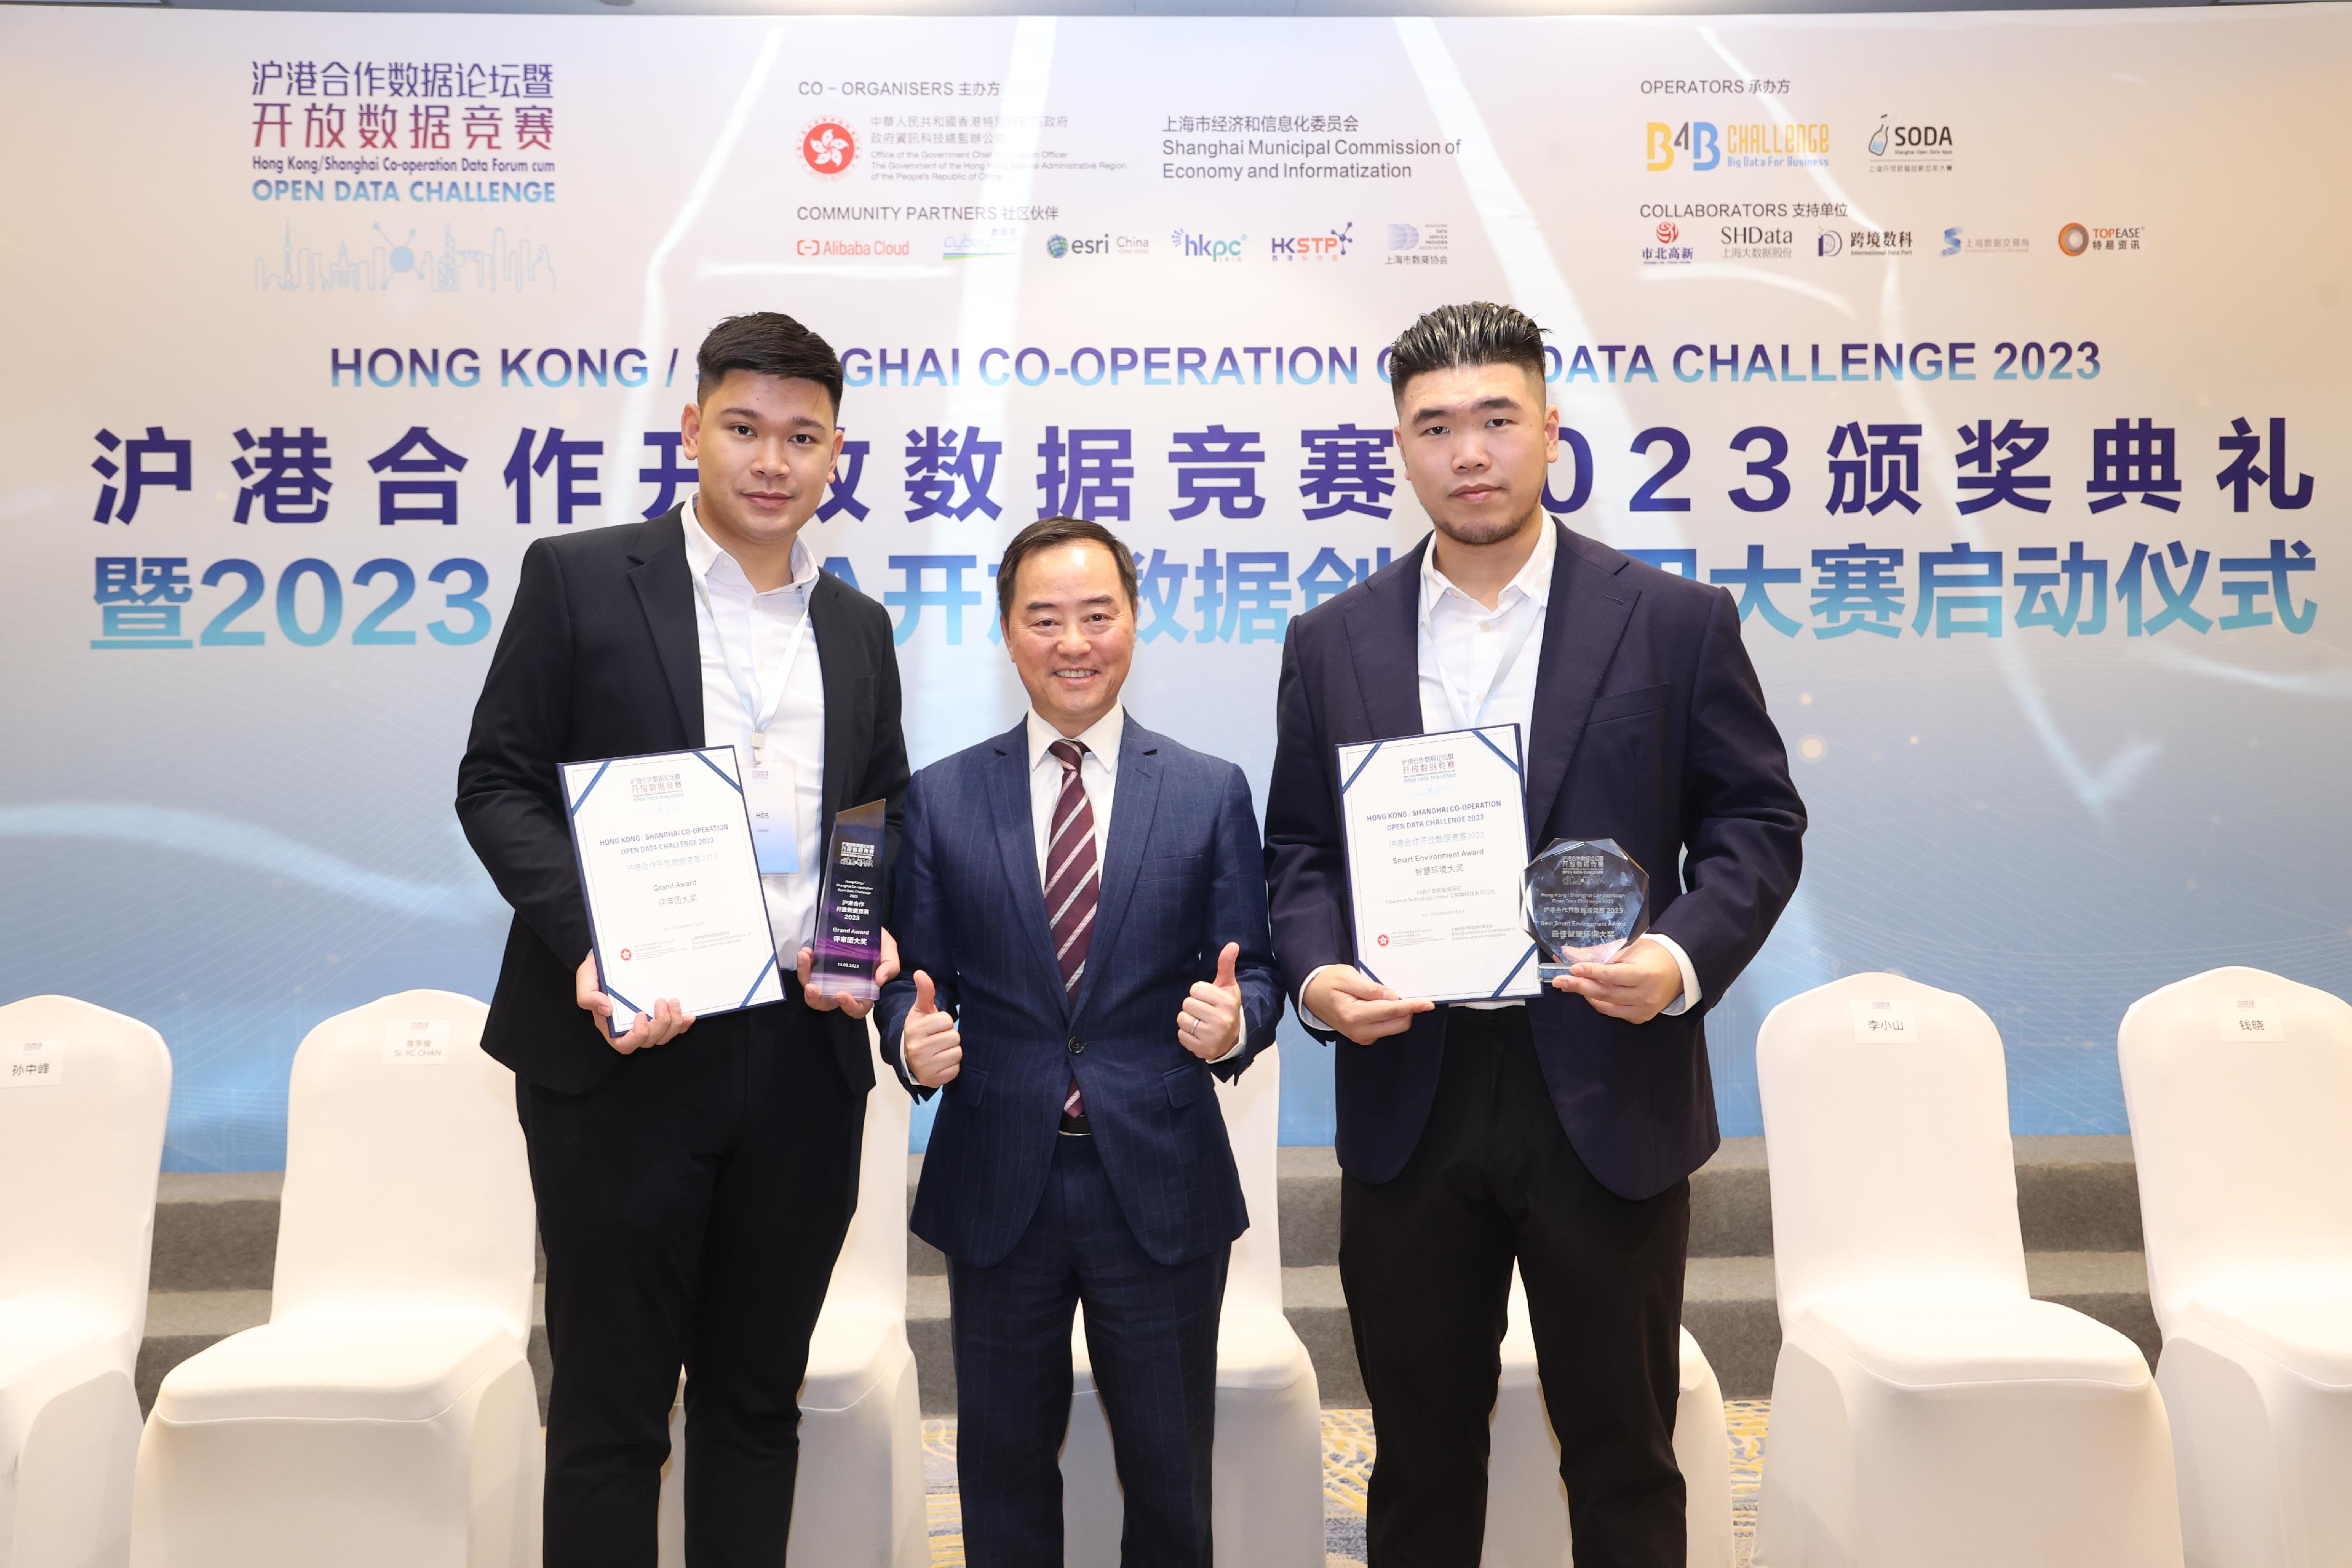 The Government Chief Information Officer, Mr Tony Wong (centre), attends the Awards Presentation Ceremony of the first Hong Kong/Shanghai Co-operation Open Data Challenge in Shanghai today (August 14) and is pictured with the winner of the Grand Award, Albacastor Technology Limited from the Hong Kong delegation.